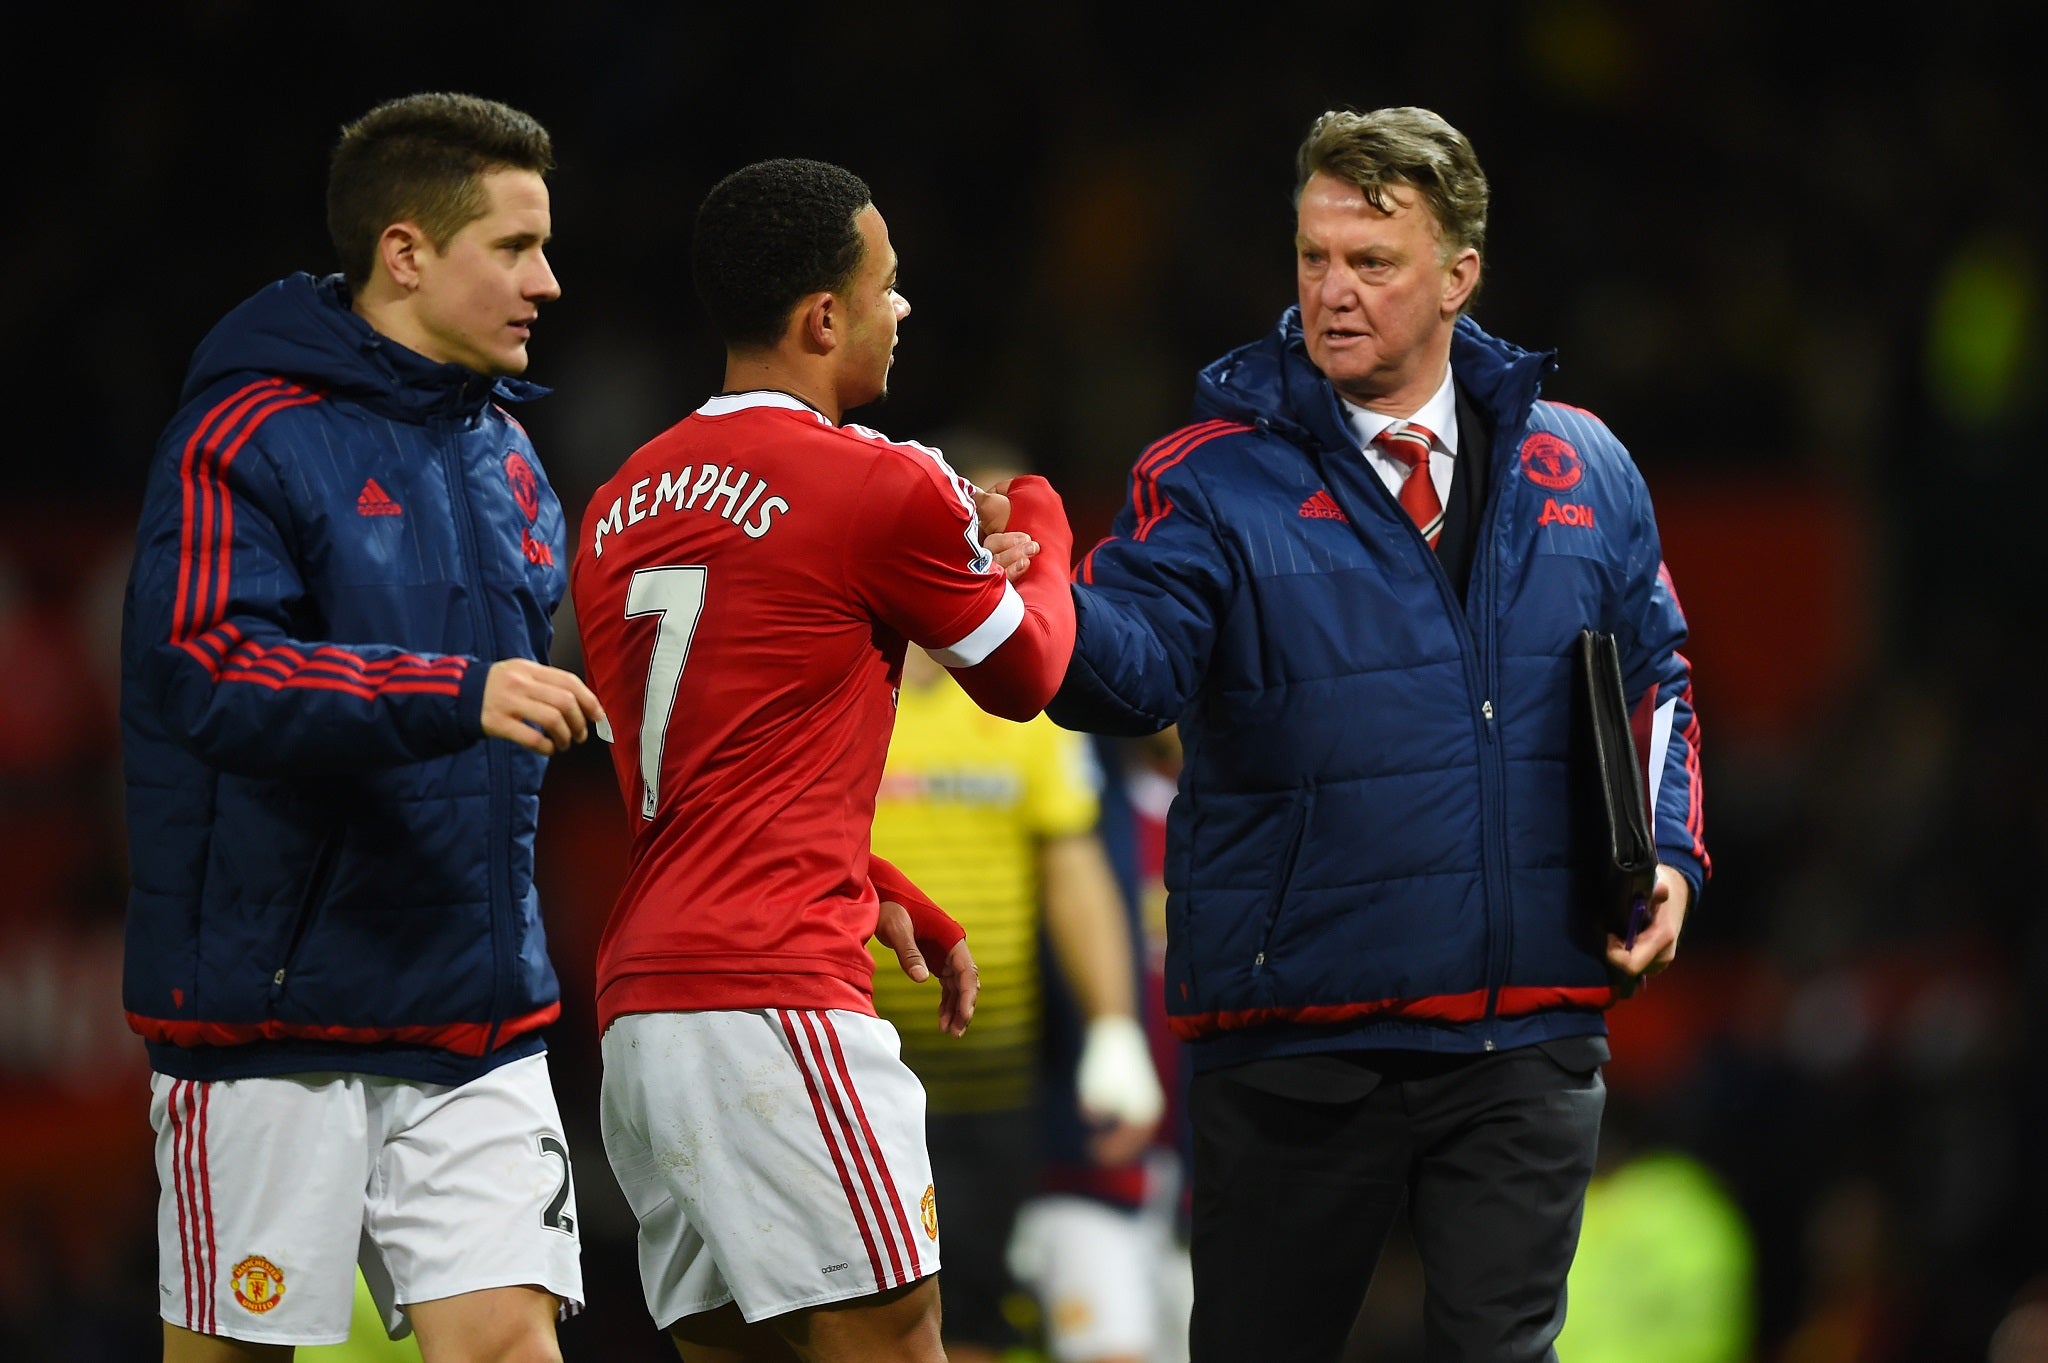 Louis van Gaal shakes hands with Memphis Depay after Manchester United's 1-0 win over Watford